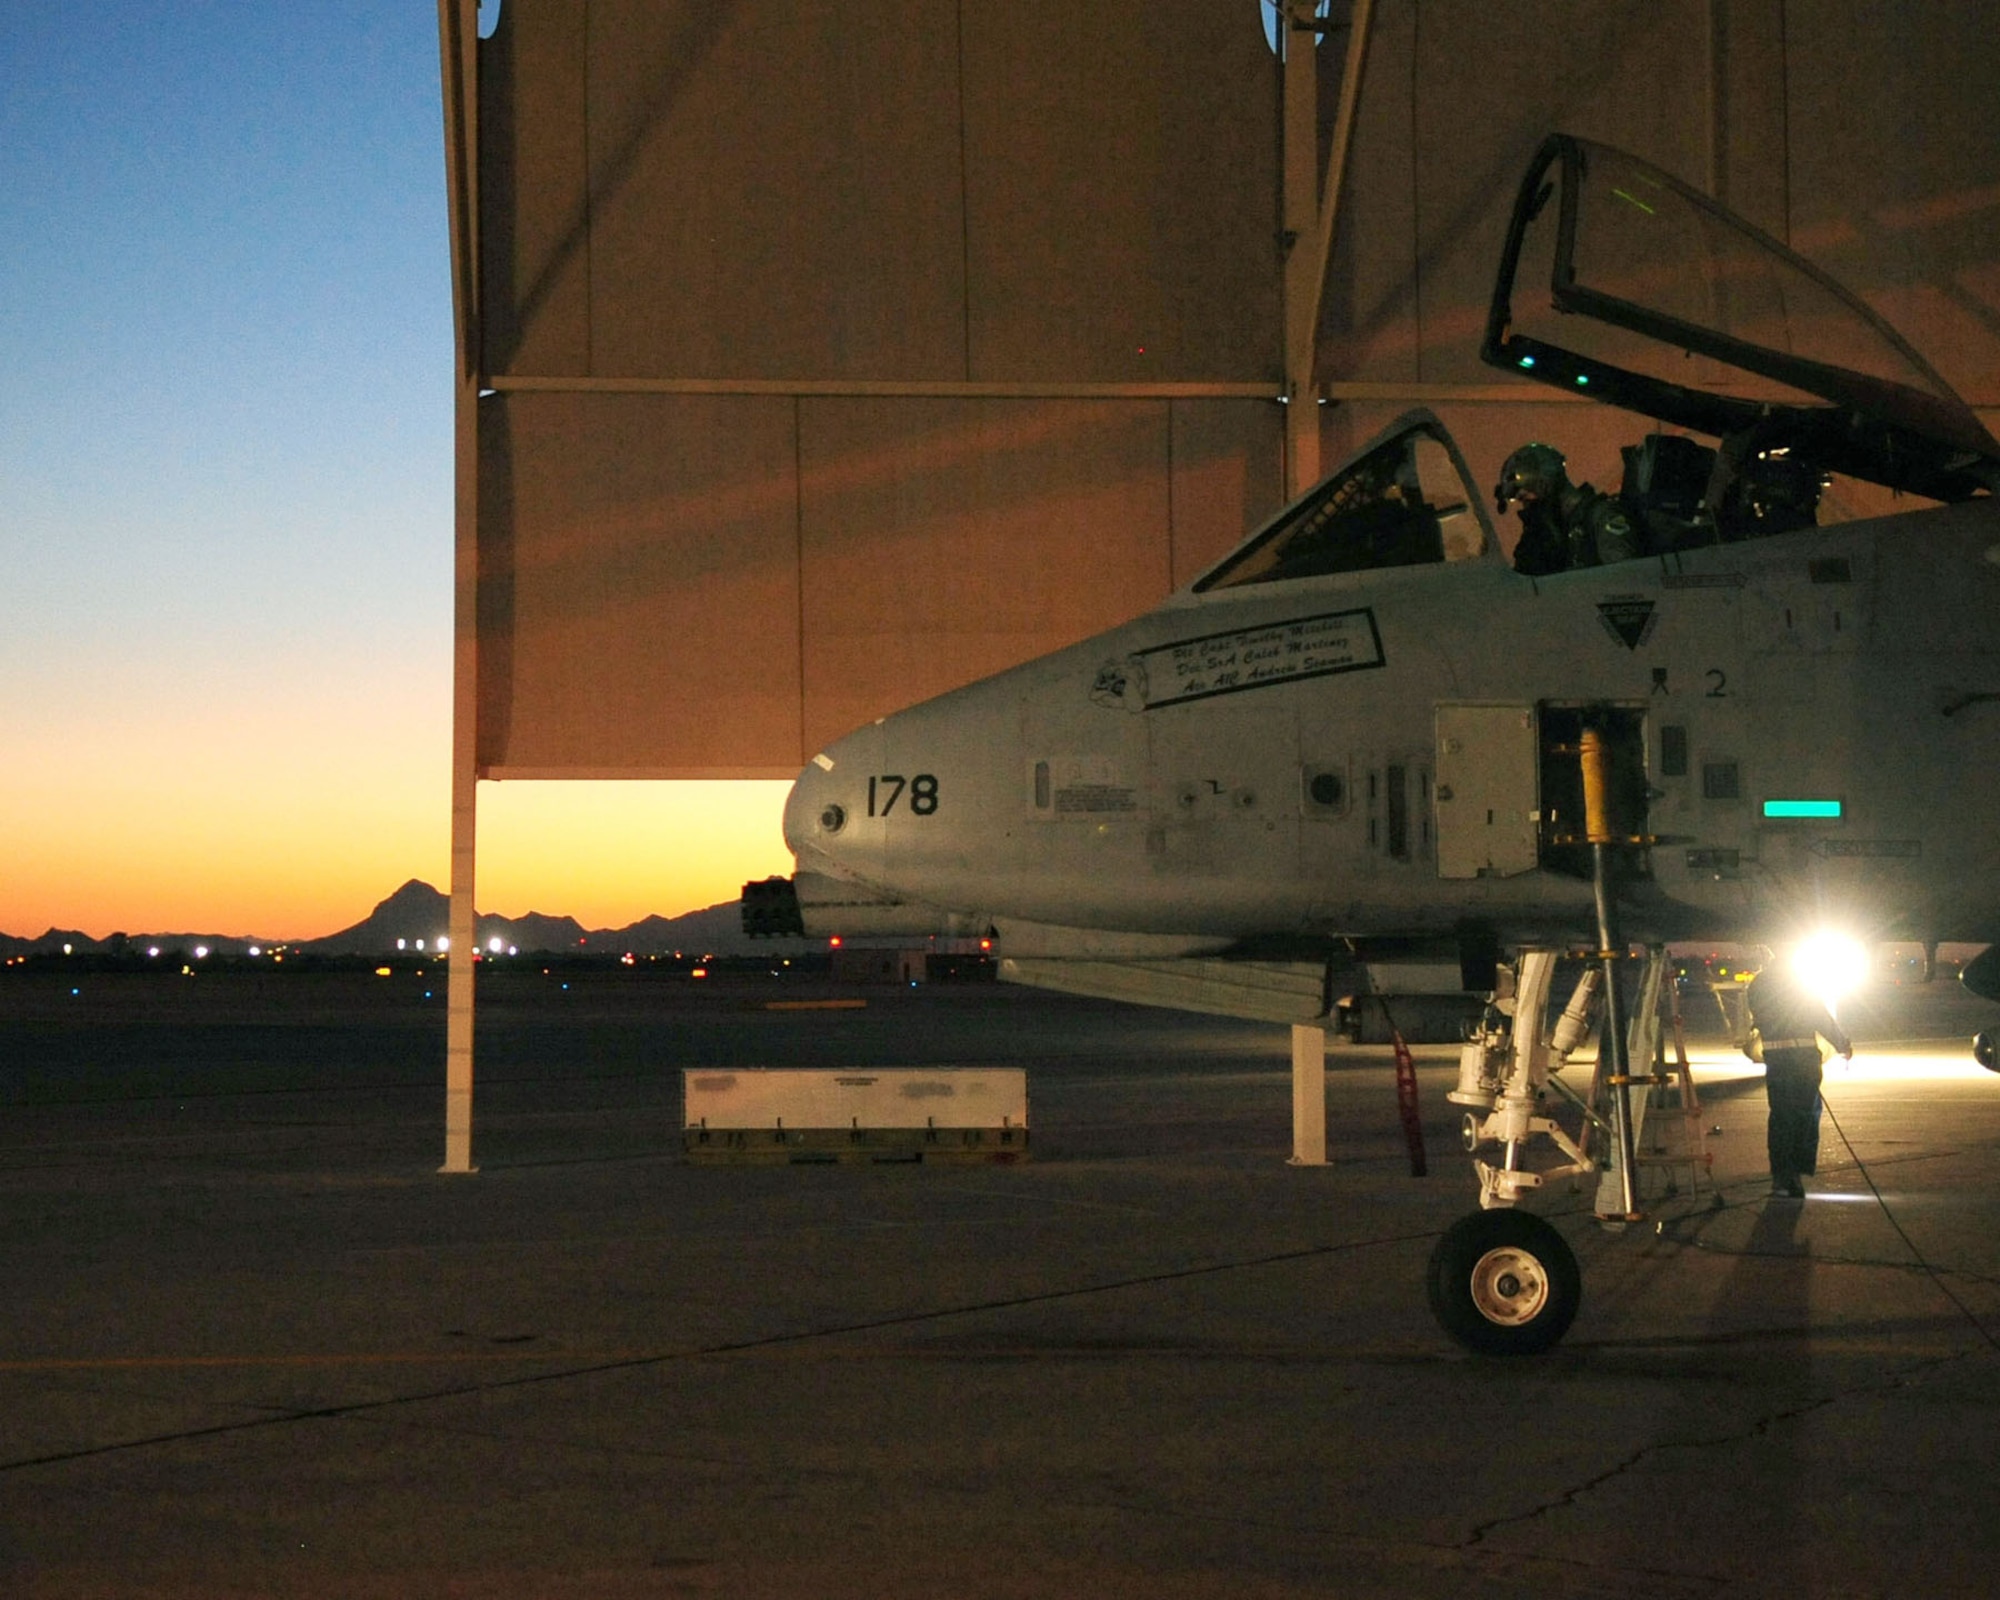 1st Lt. Dan Griffin, a pilot from the 358th Fighter Squadron at Davis-Monthan Air Force Base, Ariz., performs his final operations checks on his A-10C Thunderbolt II prior to departing for a night flying mission June 23, 2010. Lieutenant Griffin is a student in the A-10C Pilot Initial Qualification course and upon completion of this course he will be a fully qualified A-10C pilot. (U.S. Air Force photo/Airman 1st Class Jerilyn Quintanilla)